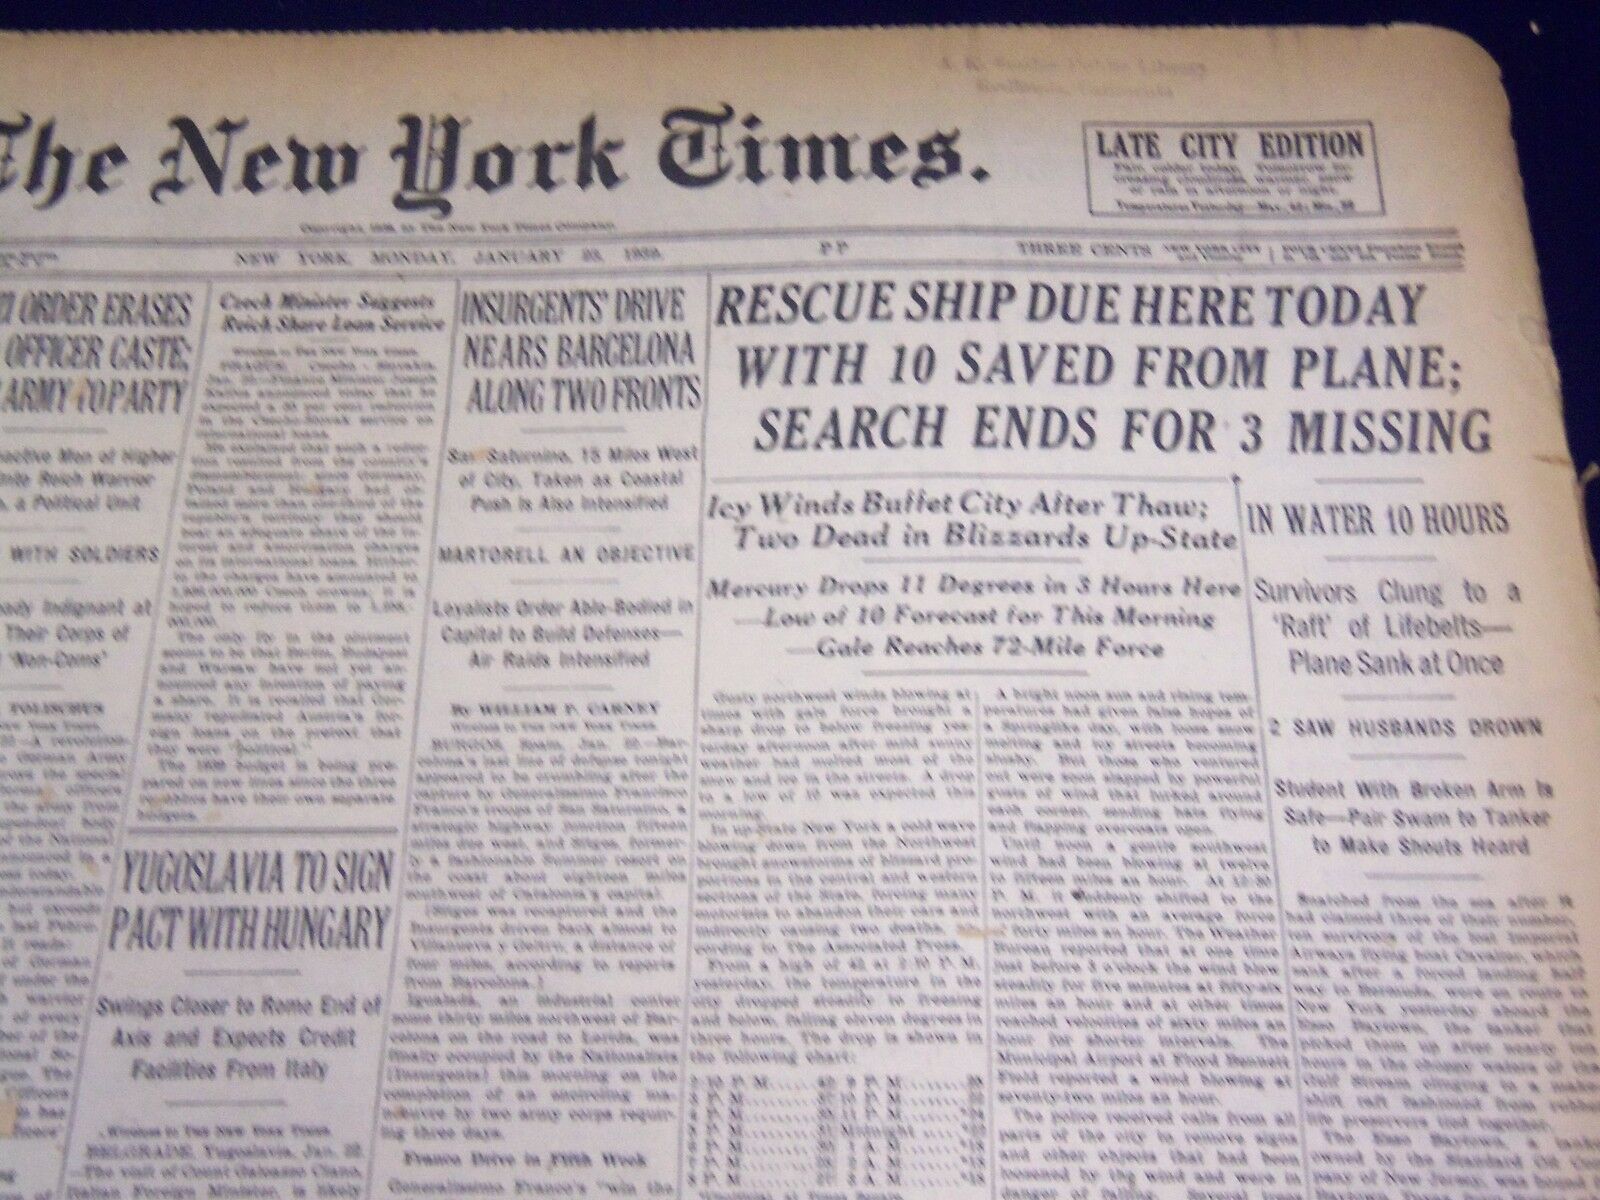 1939 JAN 23 NEW YORK TIMES - RESCUE SHIP DUE HERE TODAY WITH 10 SAVED - NT 448